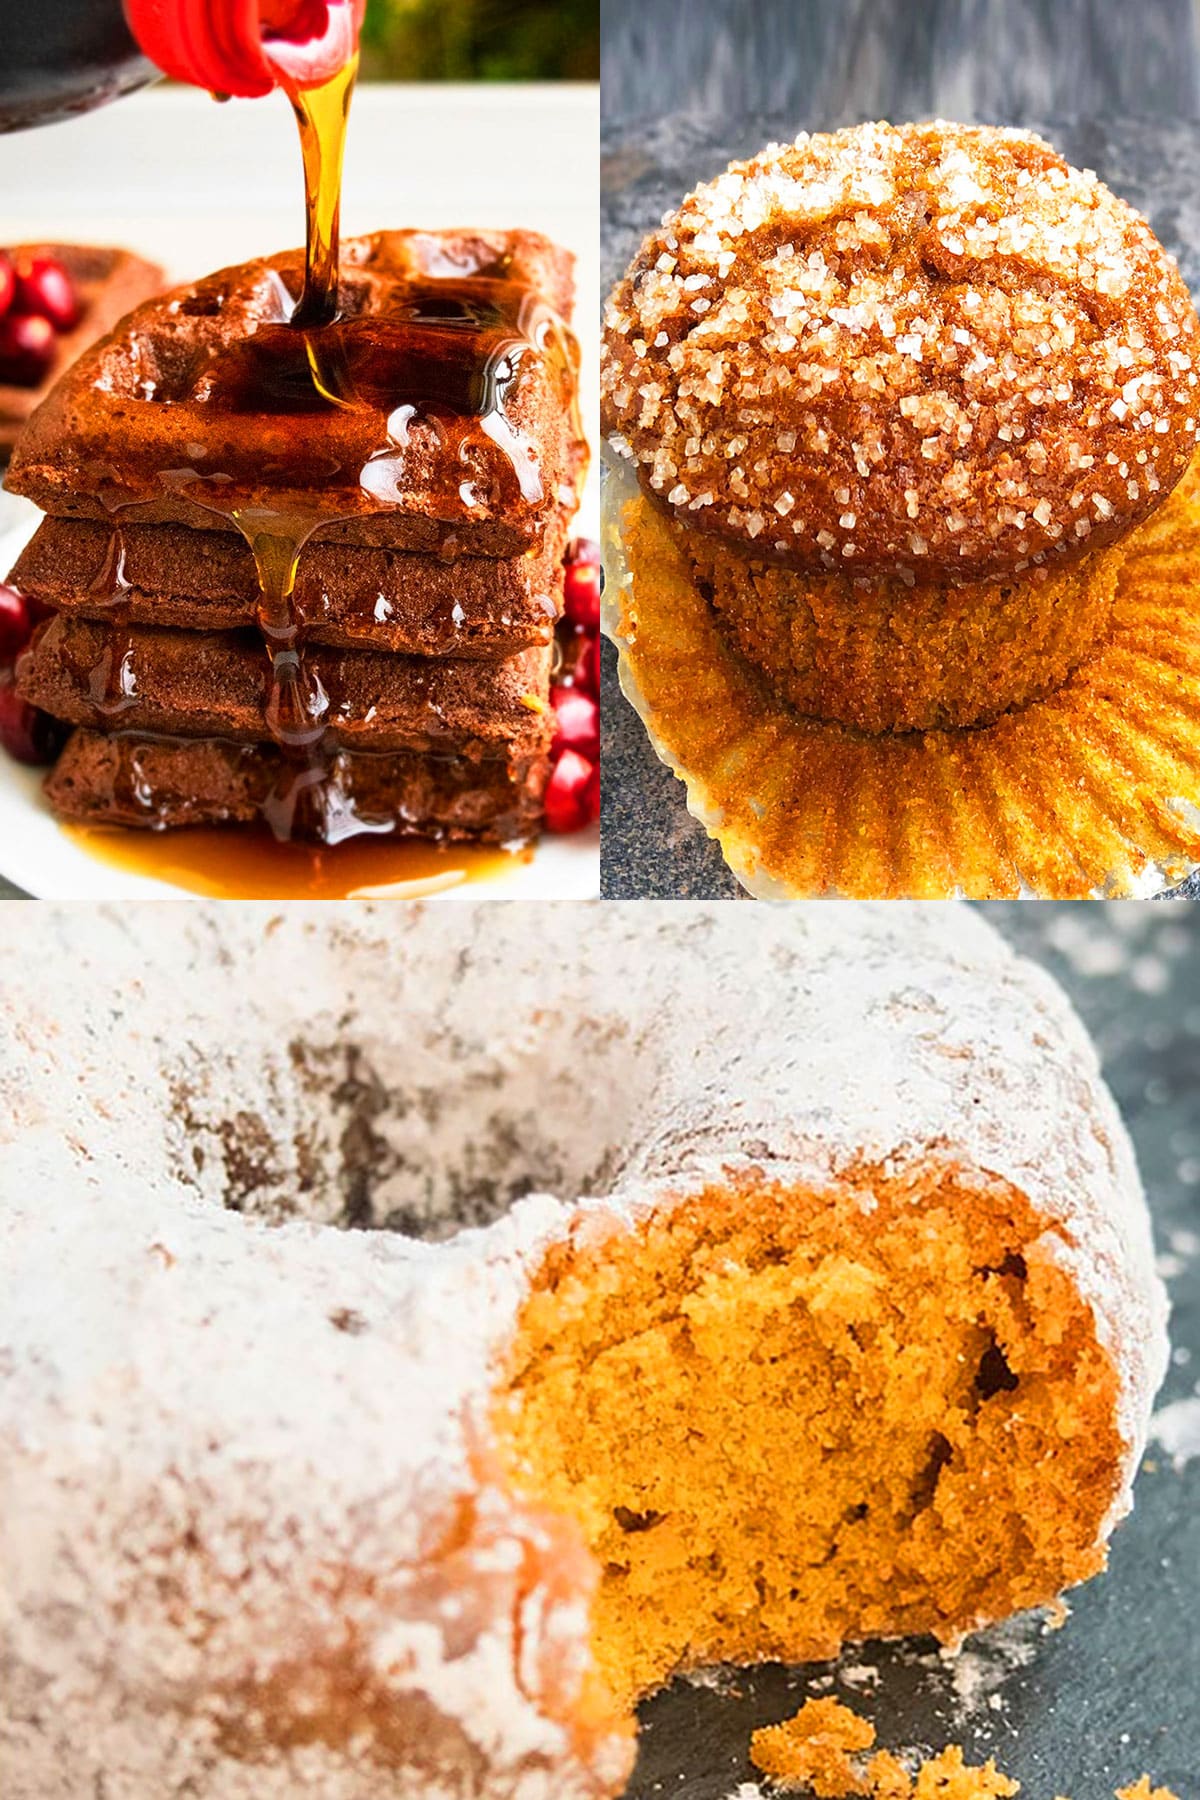 Collage Image With Many Easy Cake Mix Breakfast Recipes (Muffins, Waffles, Donuts)